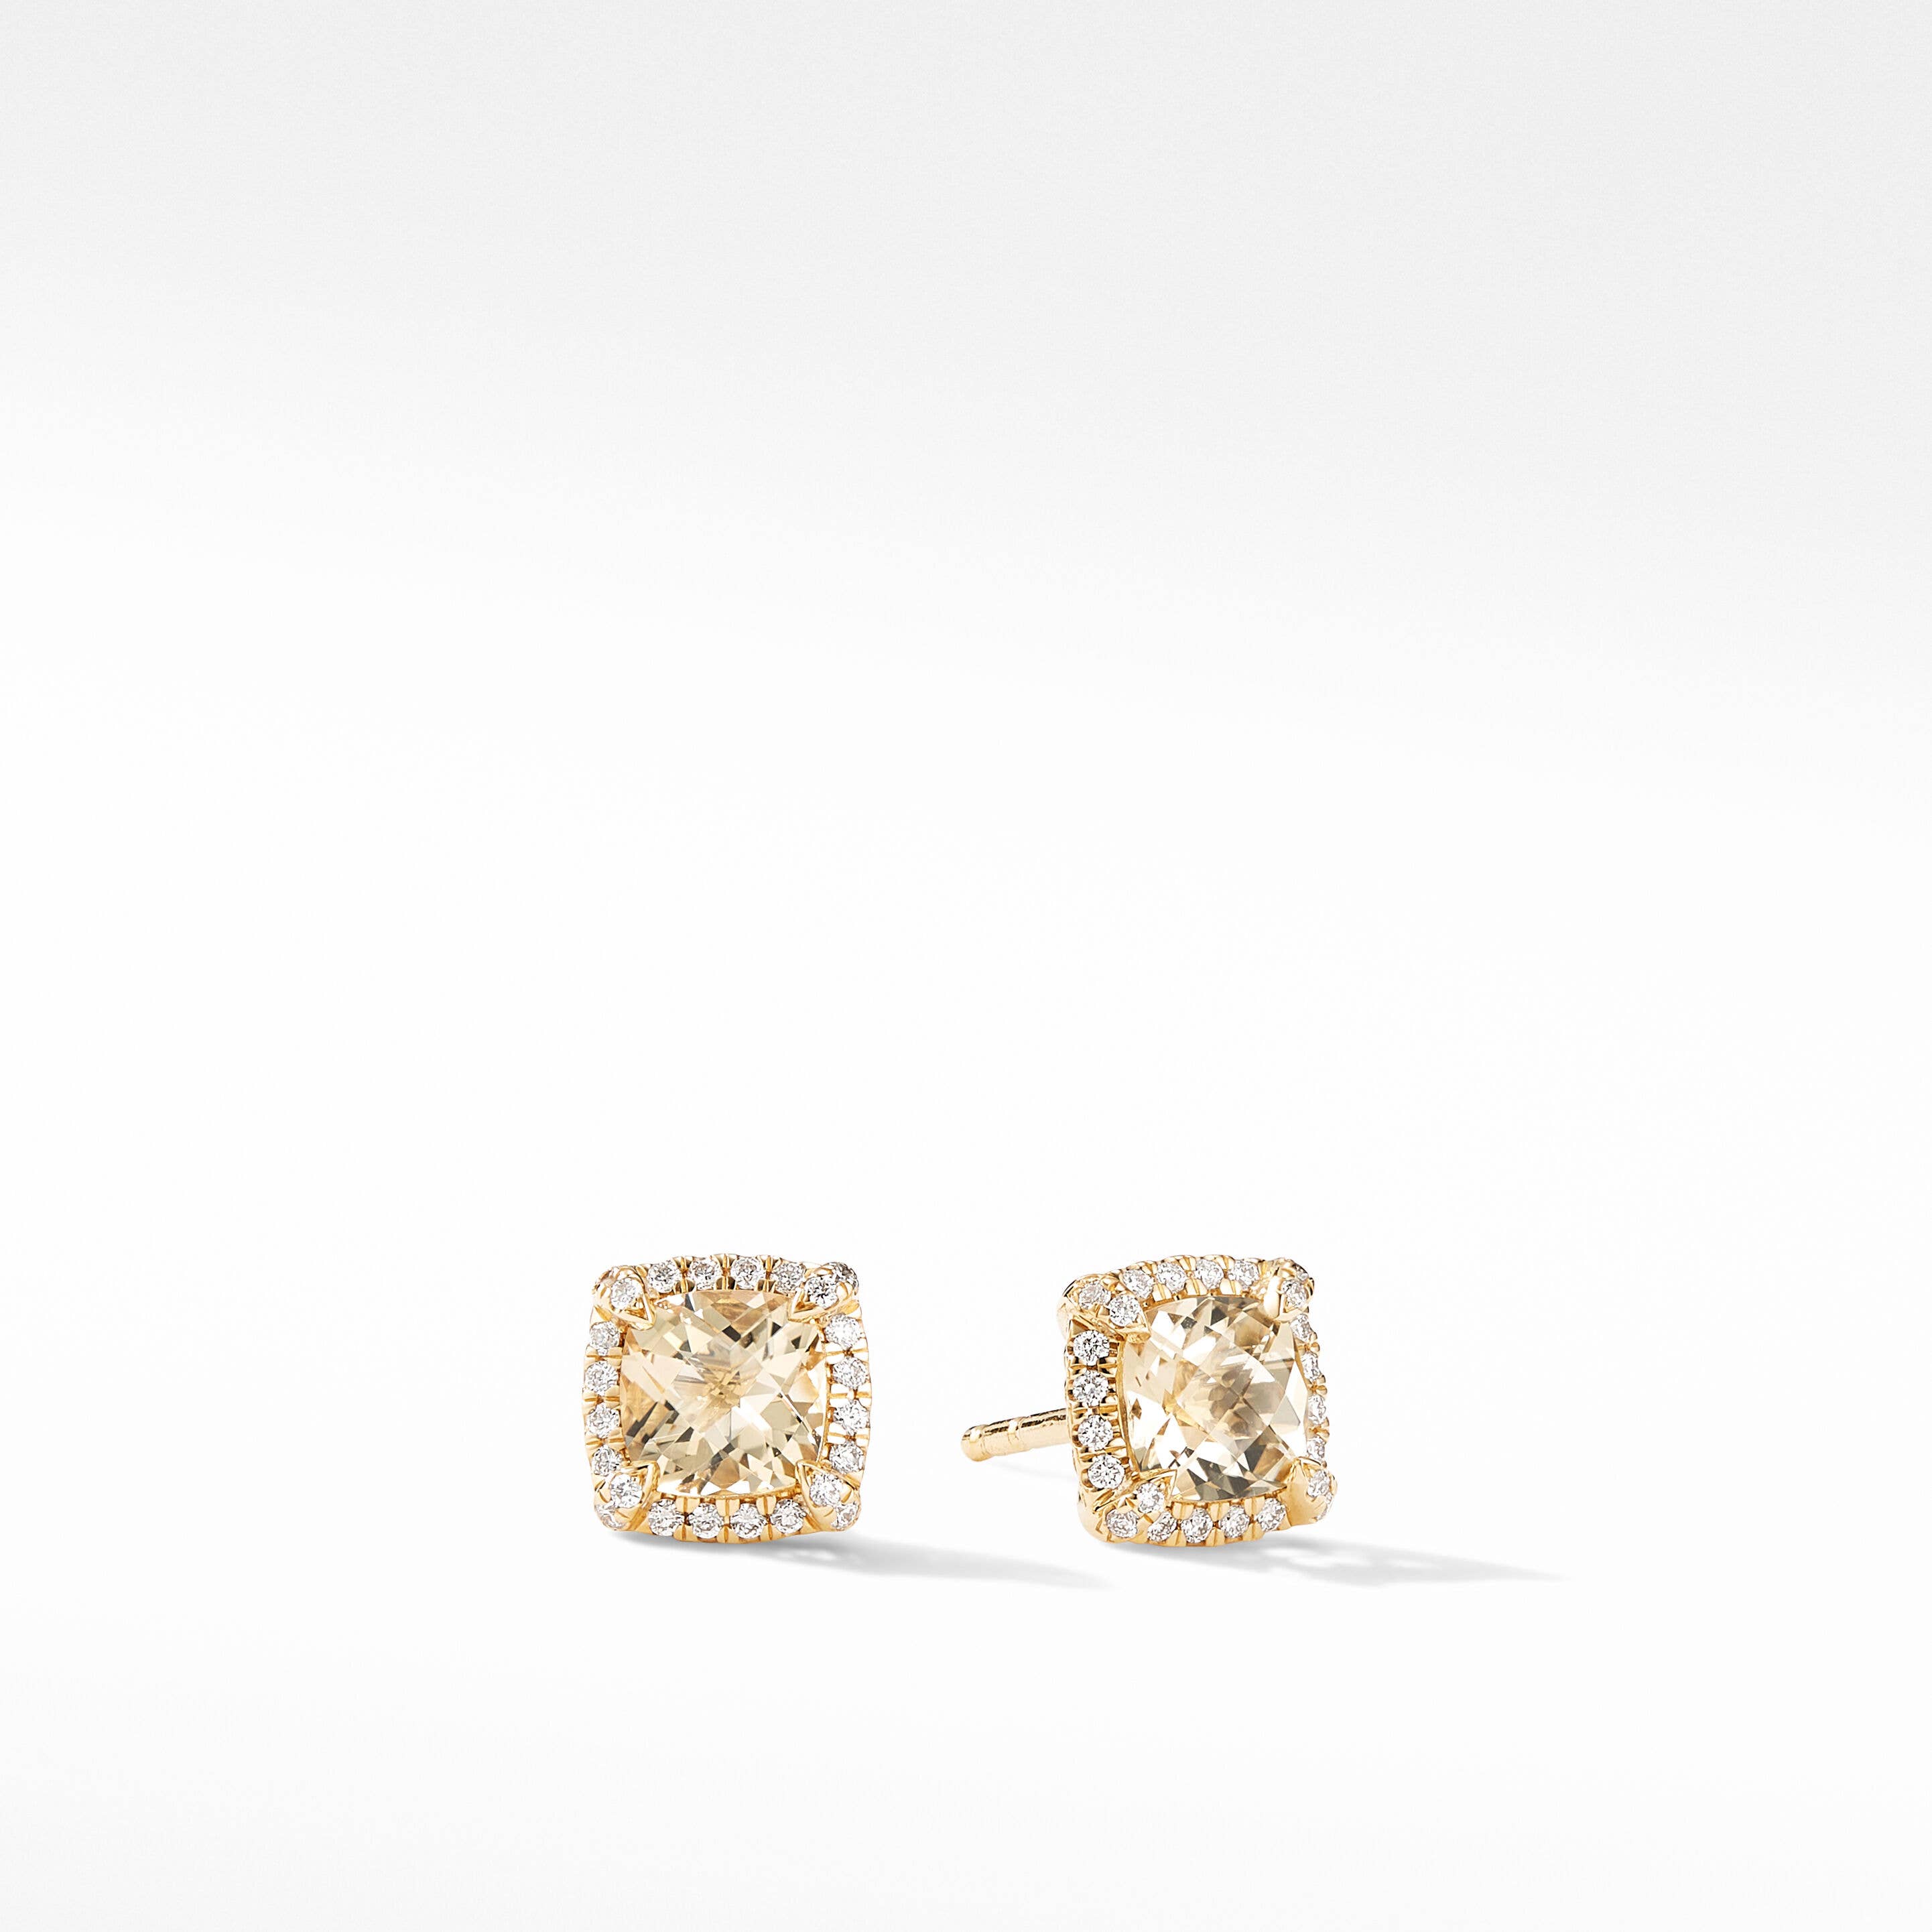 Petite Chatelaine® Pavé Bezel Stud Earrings in 18K Yellow Gold with Champagne Citrine and Diamonds